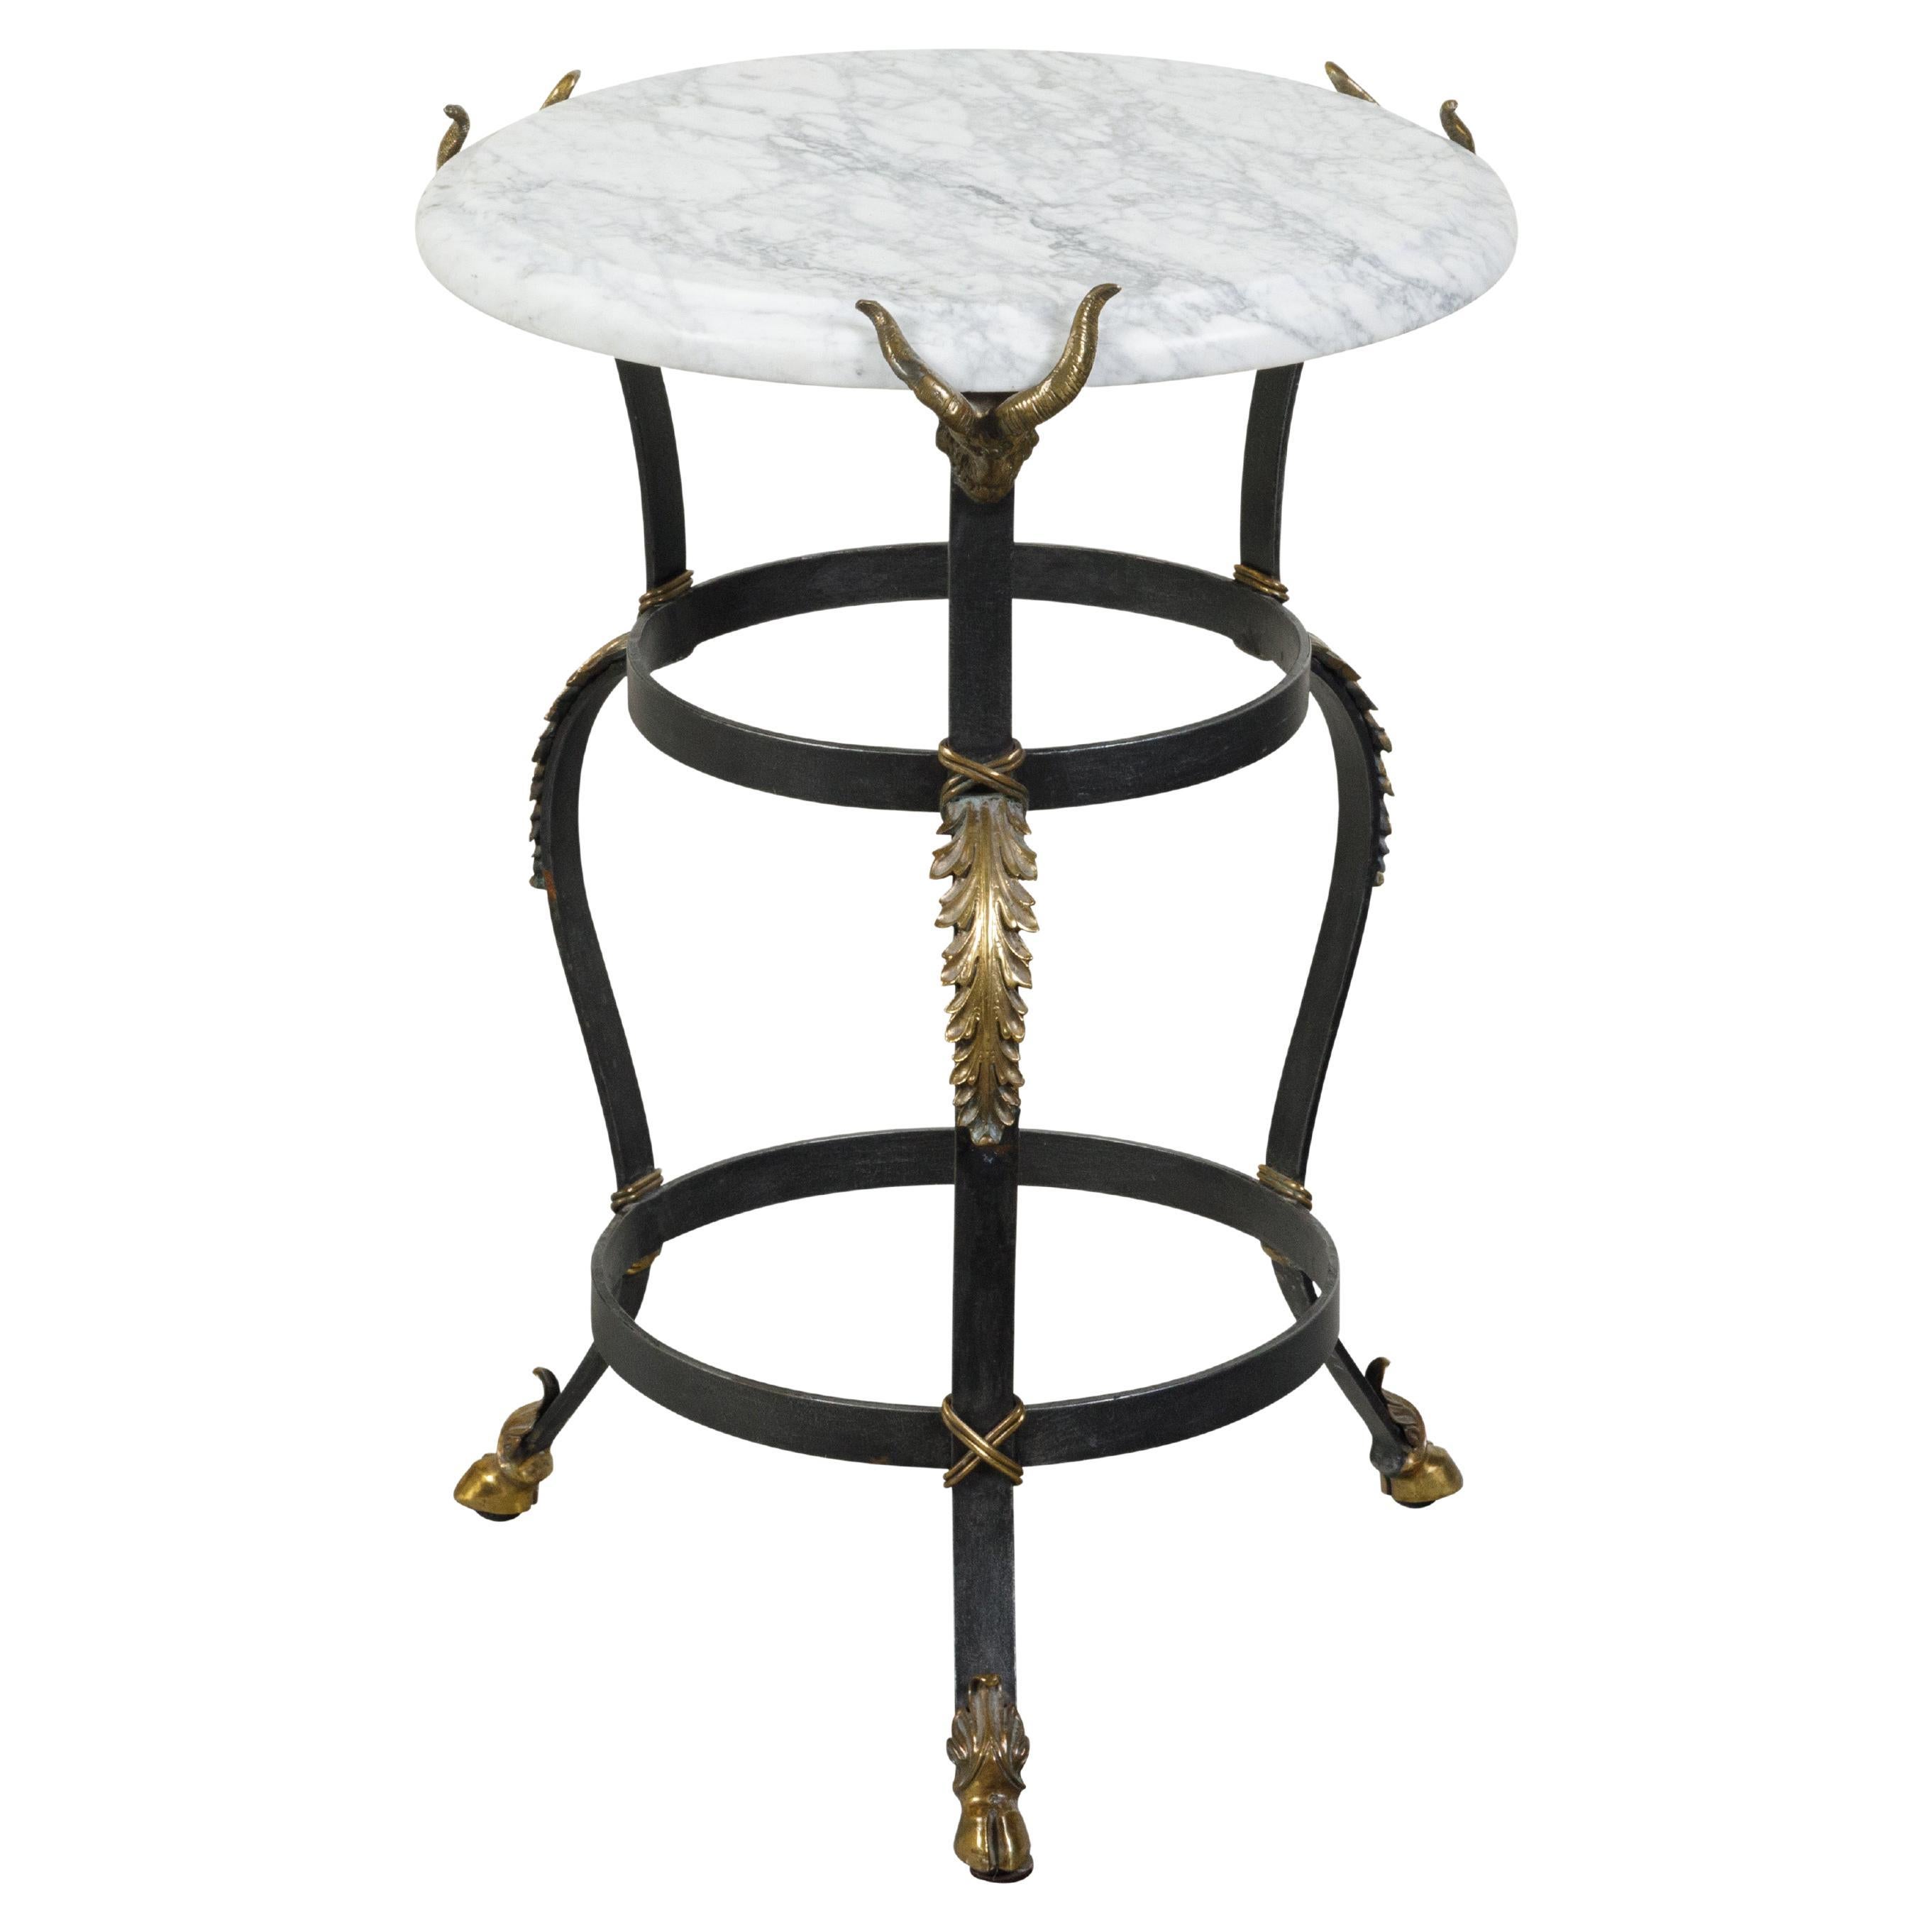 Italian Mid-Century Iron Side Table with White Marble Top and Bronze Rams' Heads